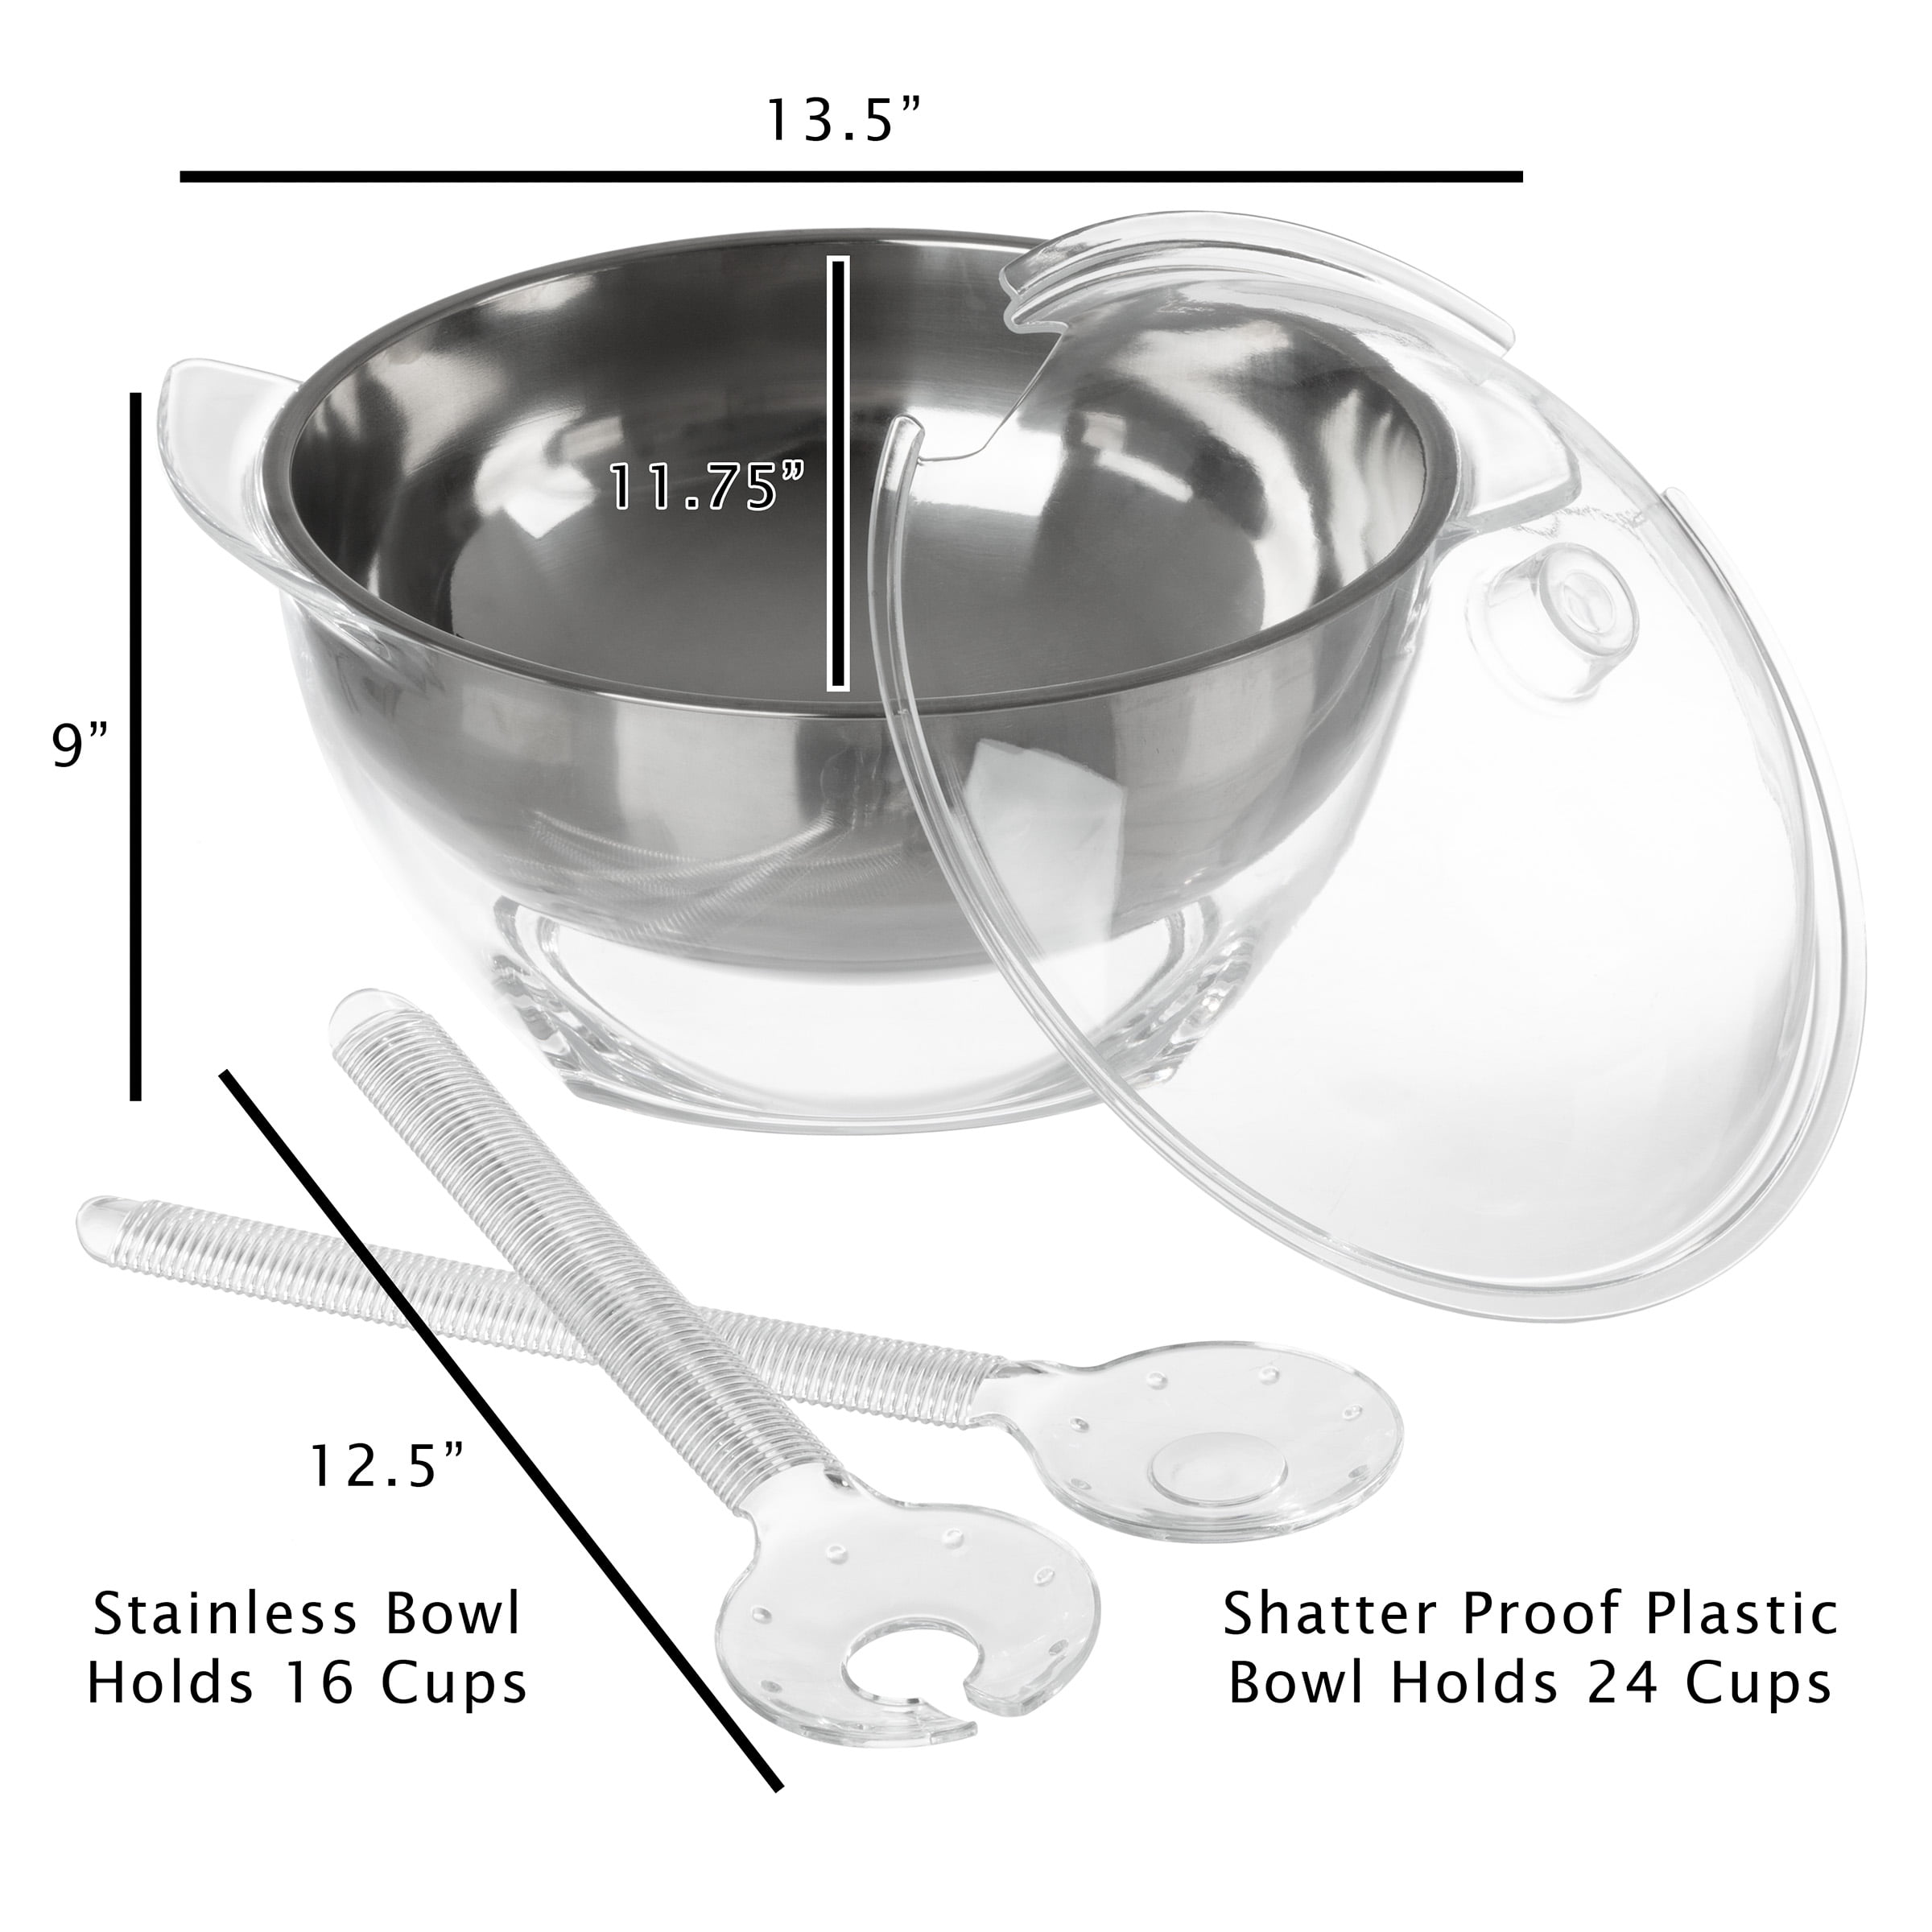  Salad Serving Bowl for Kitchens, Parties, Holidays, and  Celebrations - Serving 9-inch Bowls - Reusable BPA free - 124 oz. Capacity,  Set of 3 : Home & Kitchen